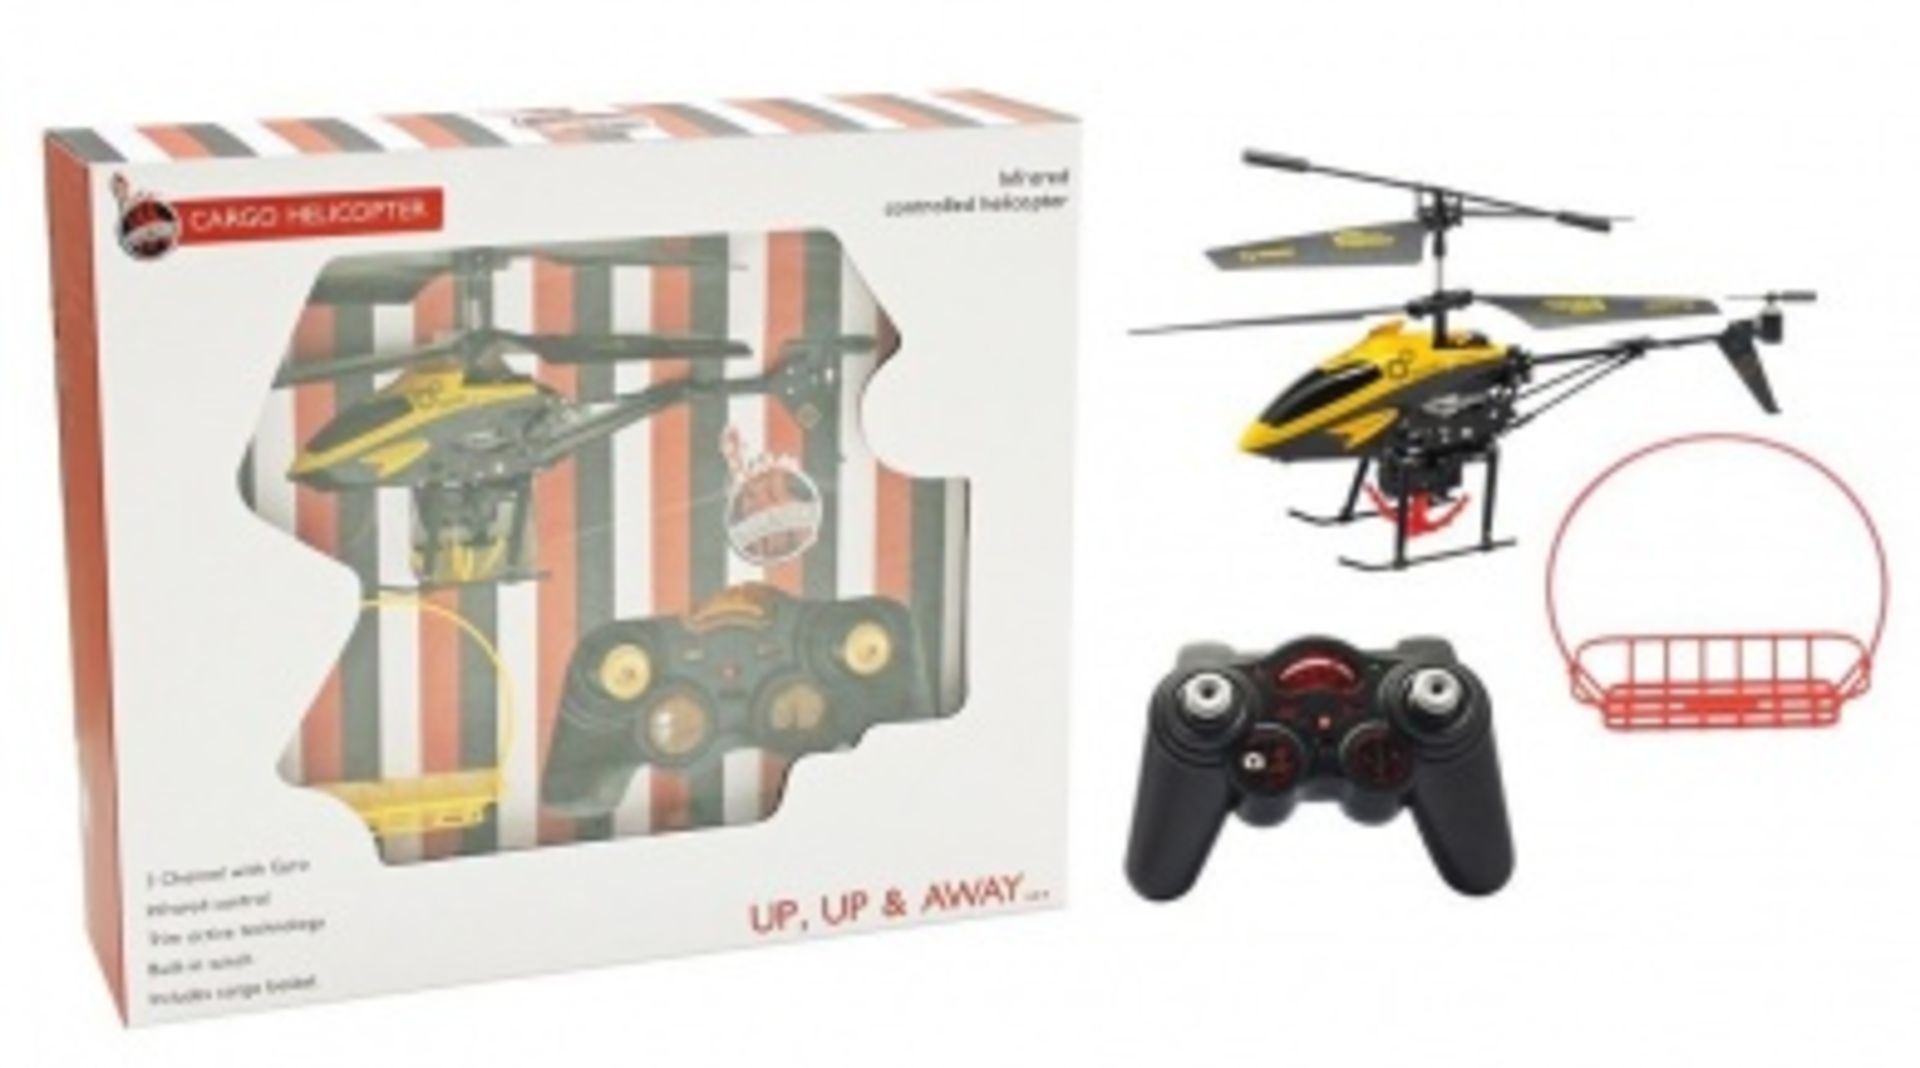 V Infrared controlled Cargo helicopterwith 3-channel gyro and trim active technology. Includes